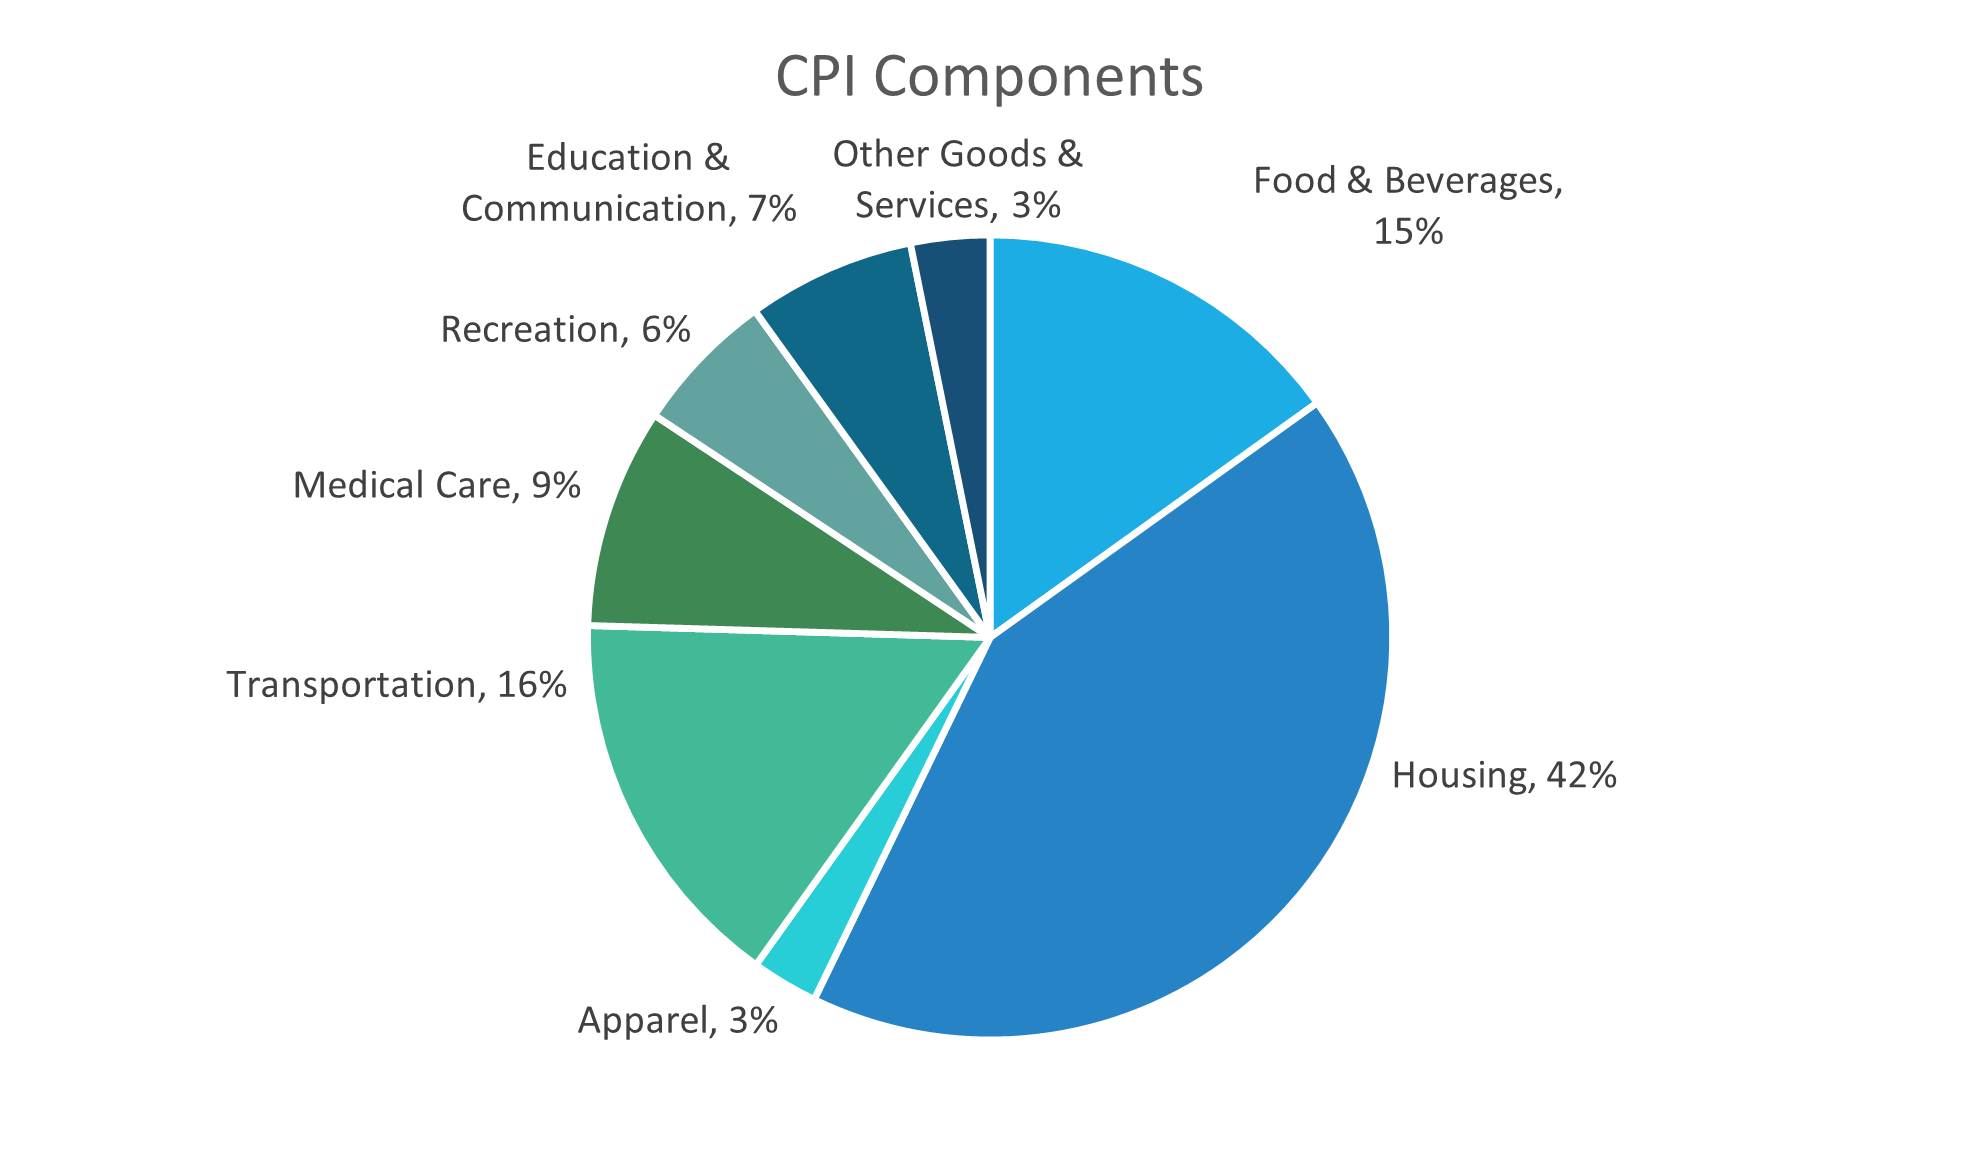 A pie chart depicting CPI Components